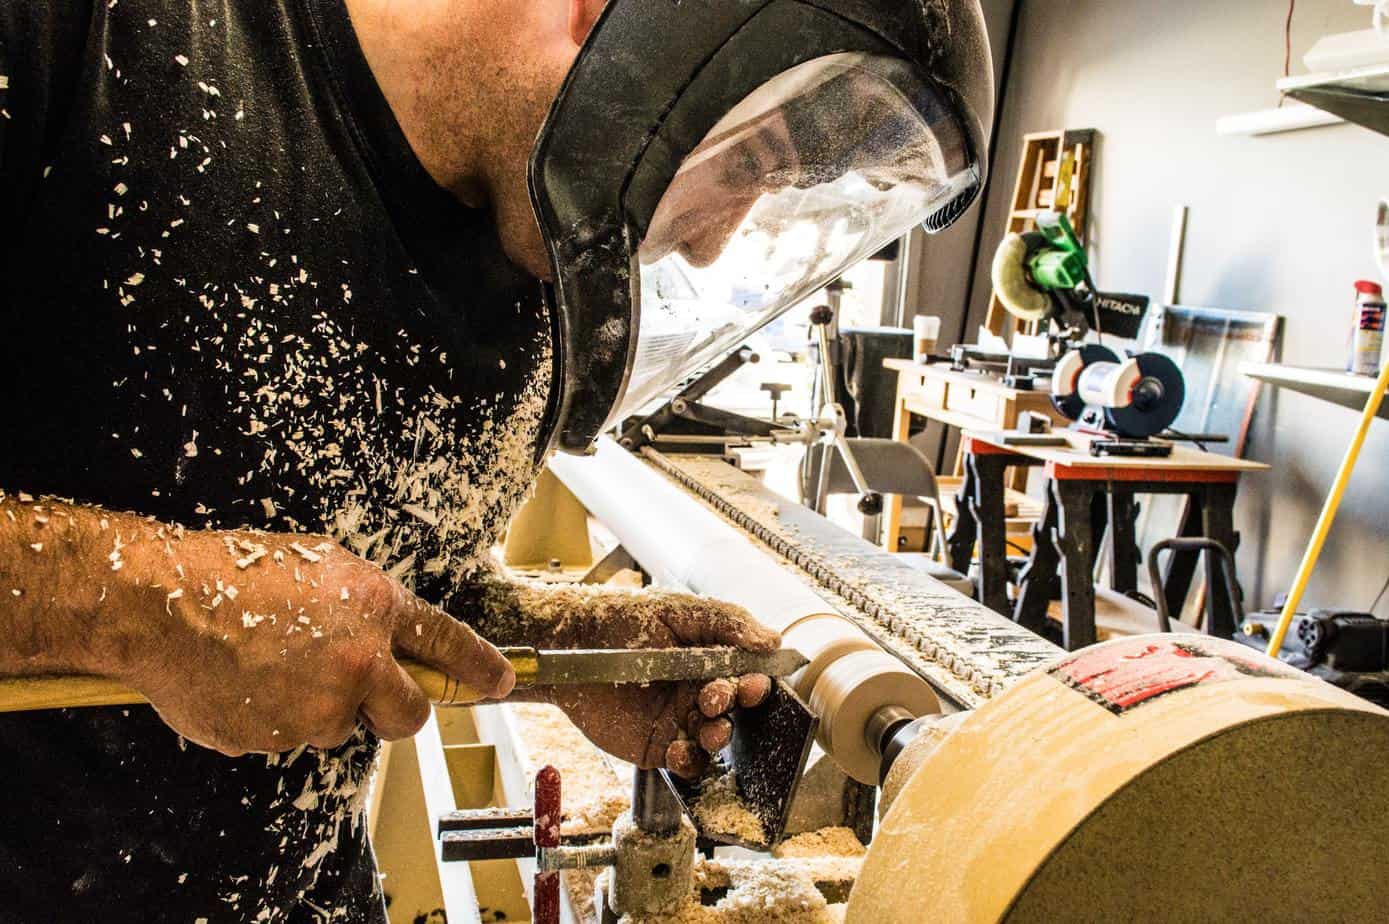 photo of a man carving wood on a turning spindle.